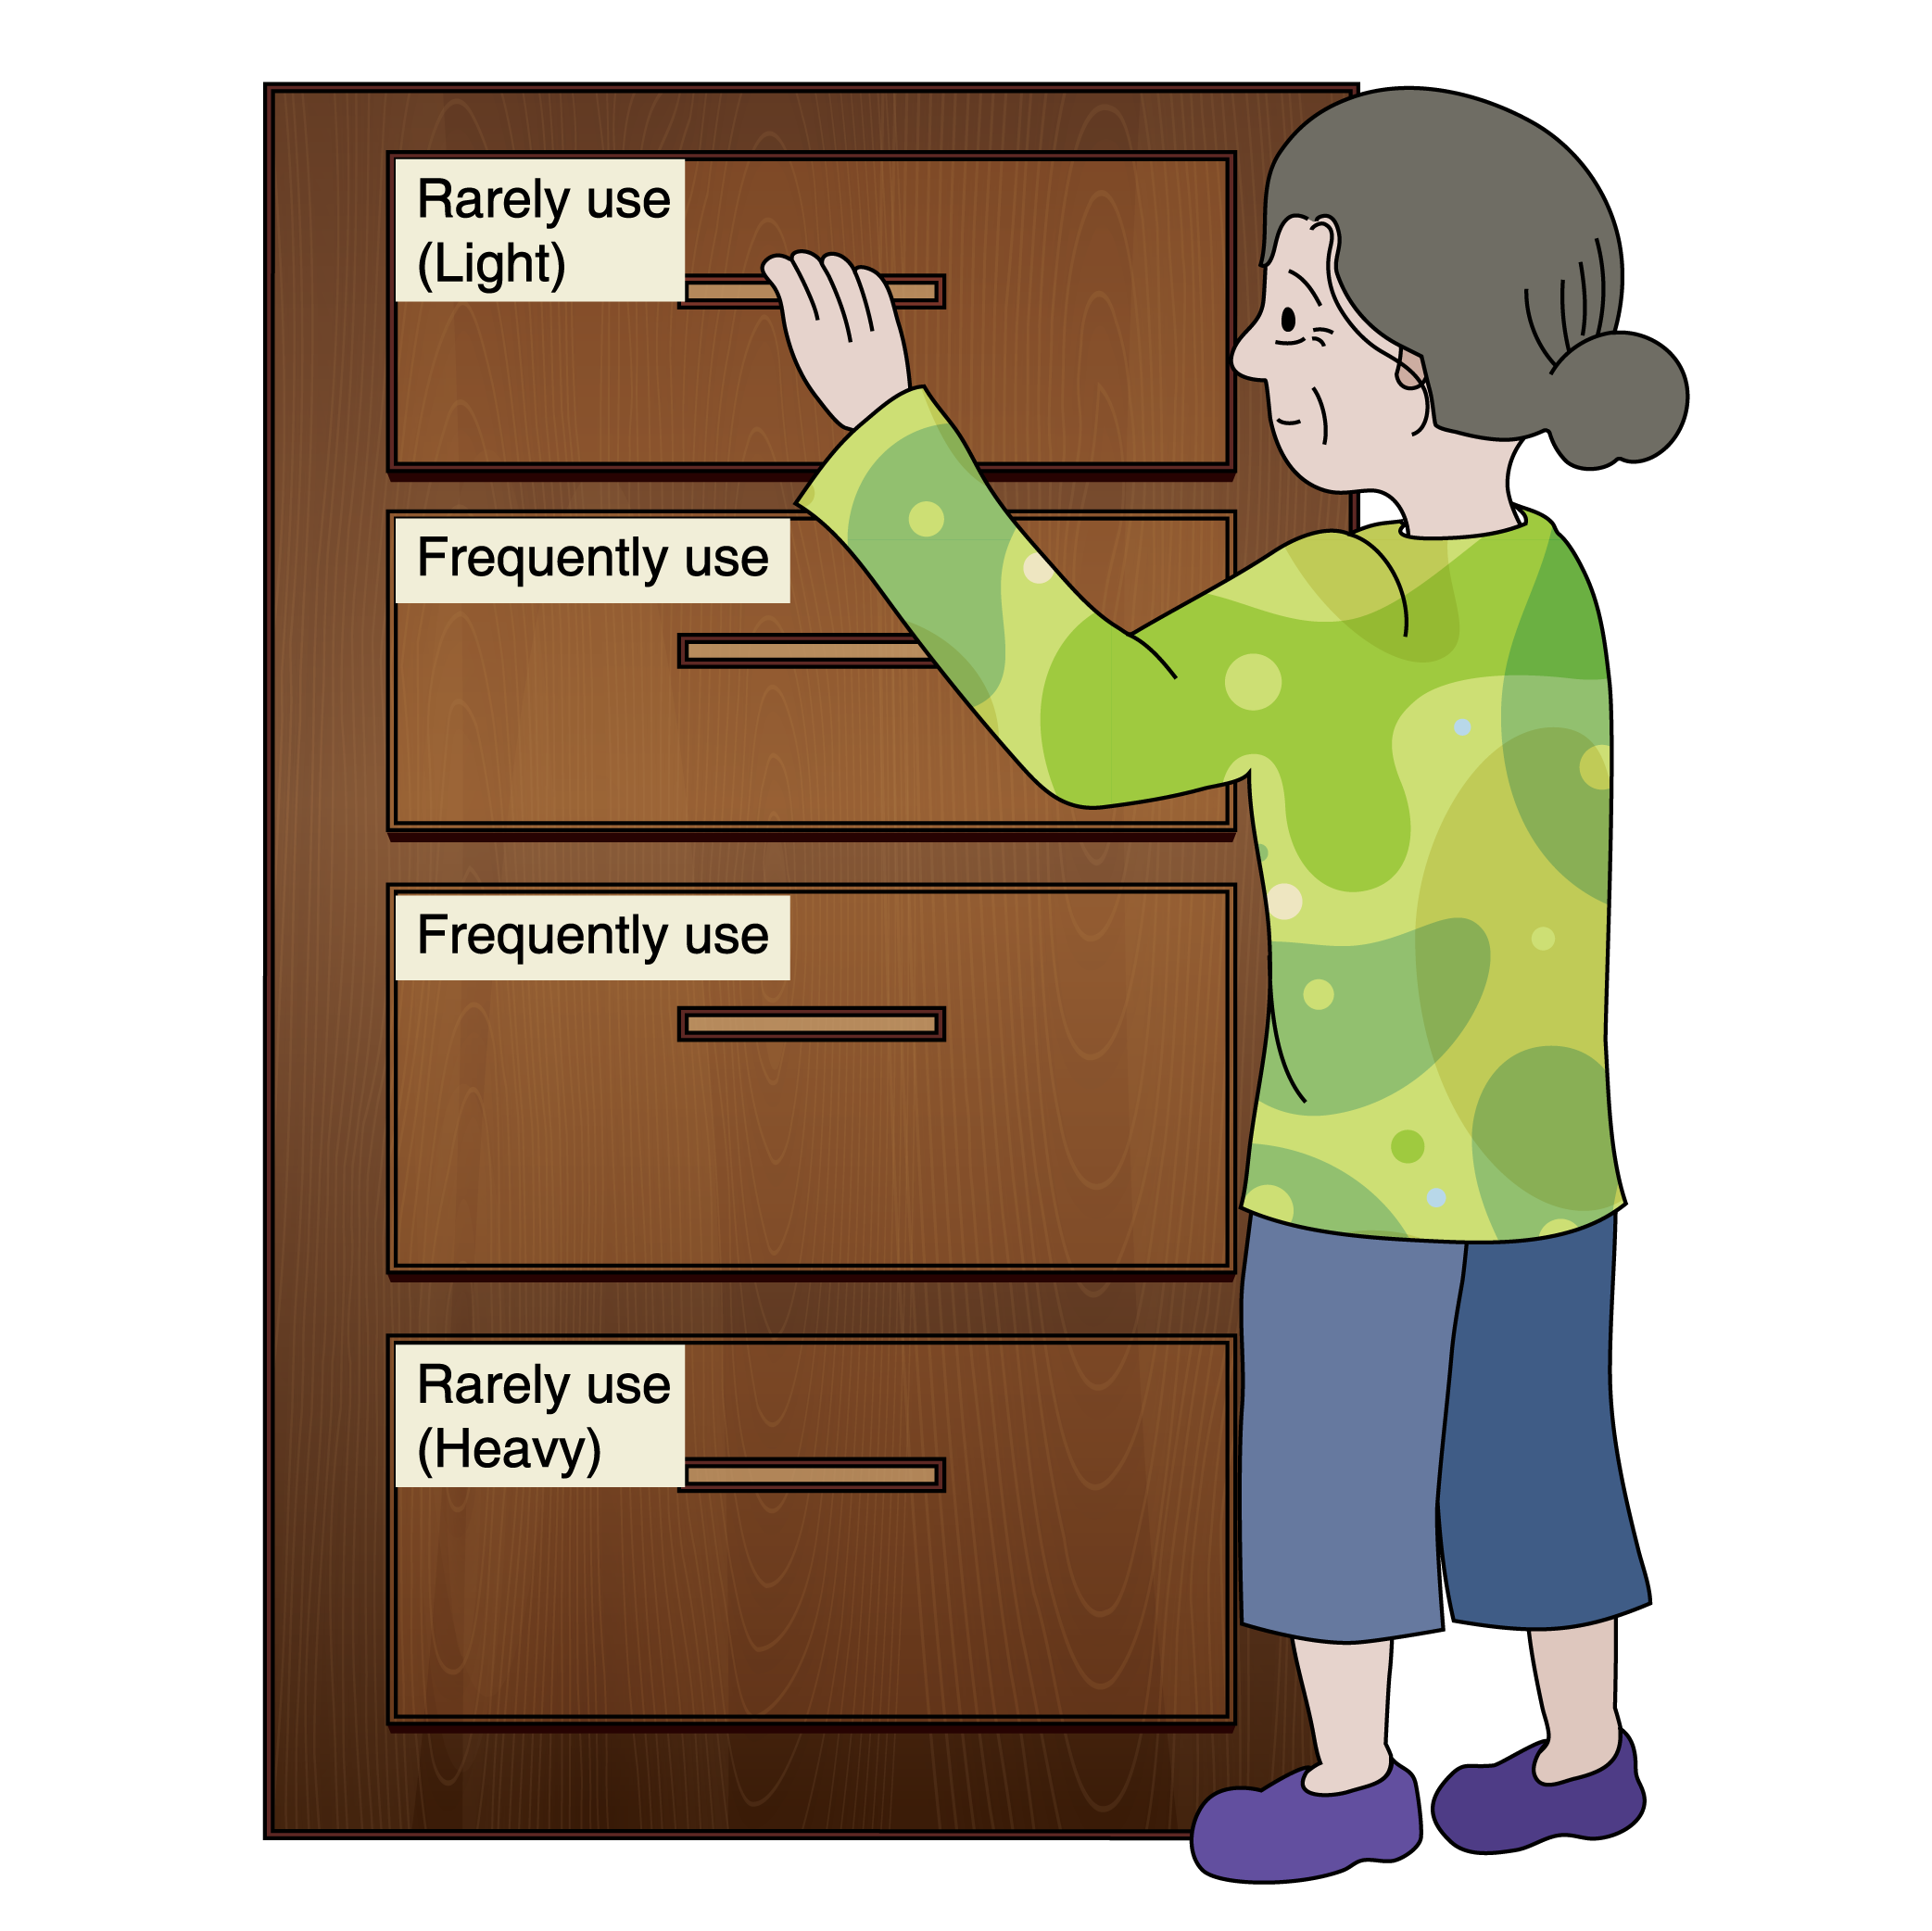 In the picture, an elder puts rarely use but light items in the cupboard above the shoulder. Frequently used items are put in cupboards between shoulder and waist height. Rarely use but heavy items are put in cupboards below the waist